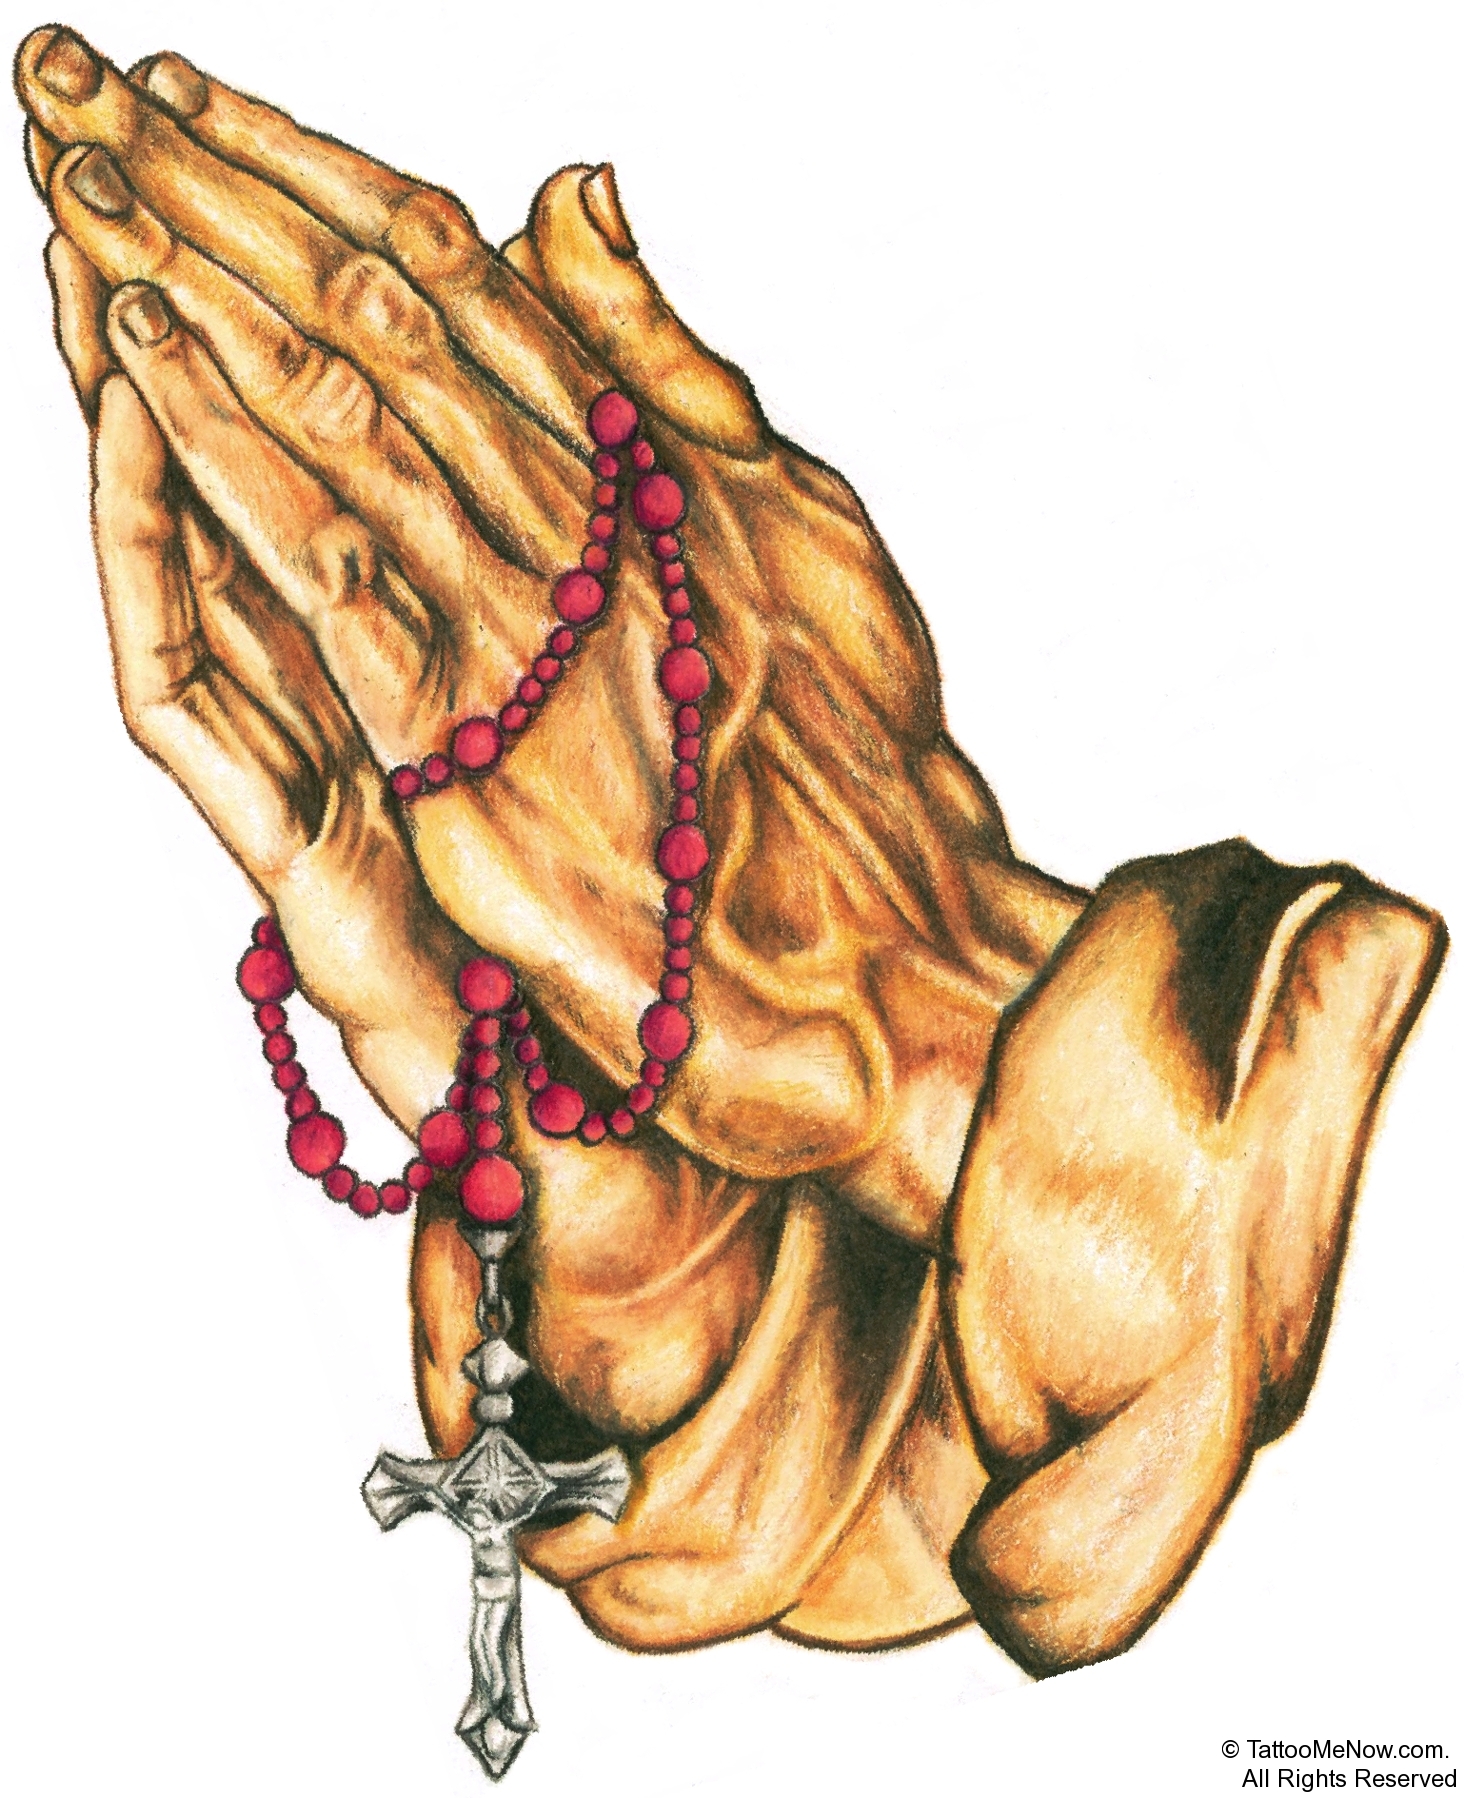 prayer hands with rosary